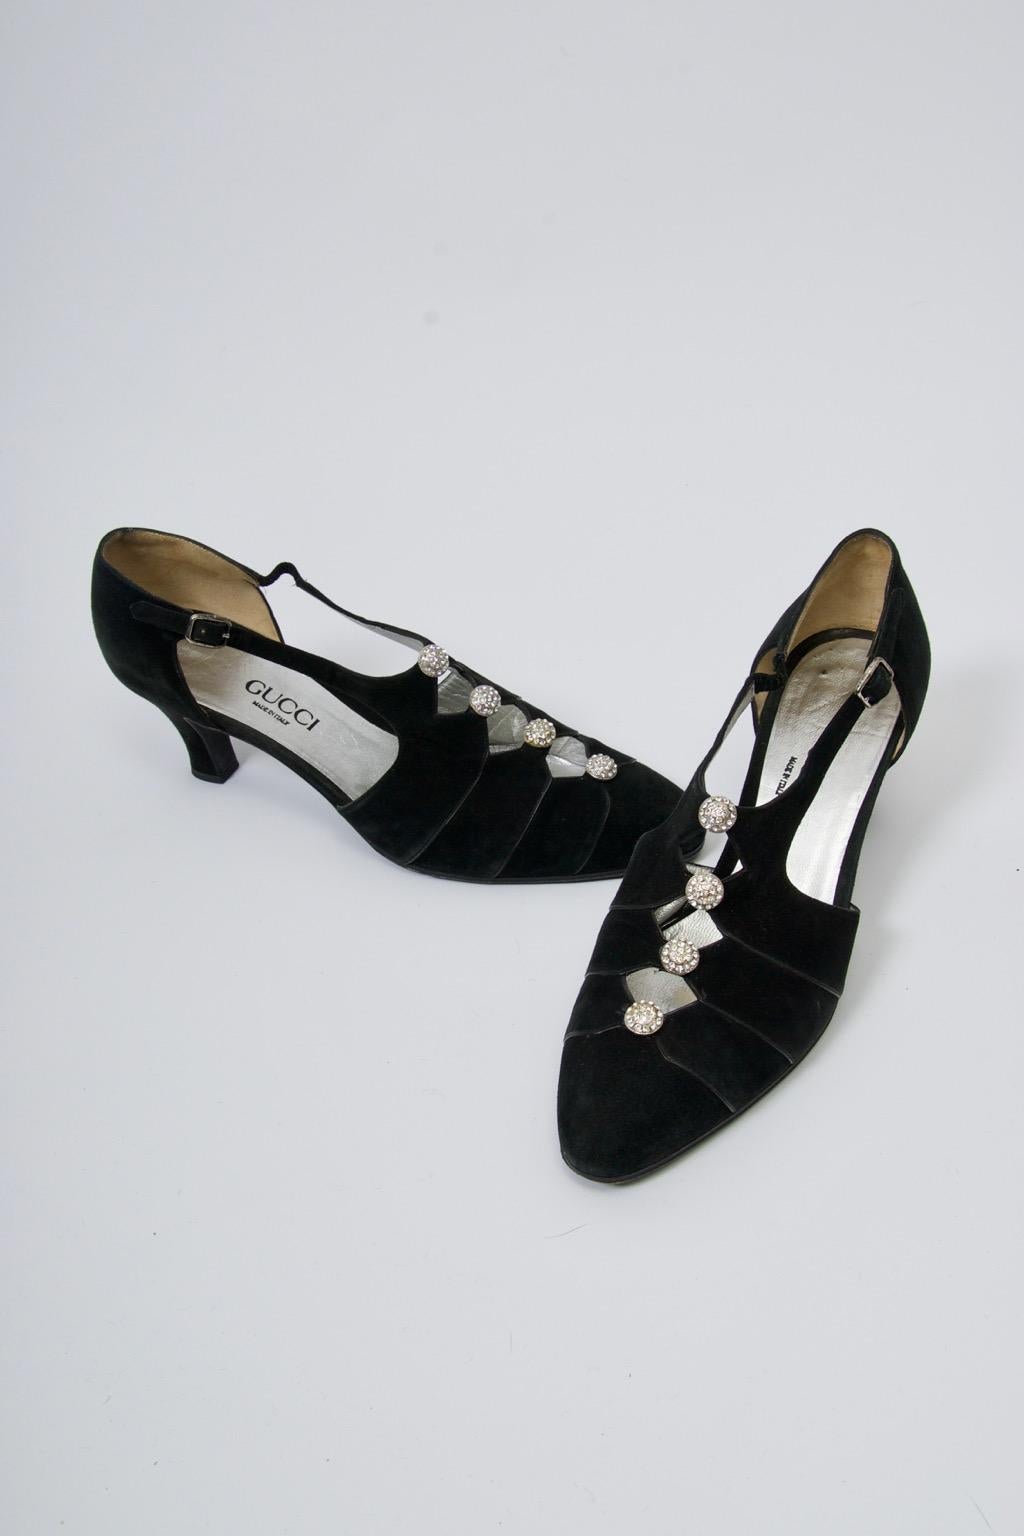 Vintage Gucci evening shoes in black suede adorned with round rhinestone buttons at the cut-our T-strap form. Narrow black leather border edging. Low heel provides a level of comfort to these elegant shoes. Approximate size 7.